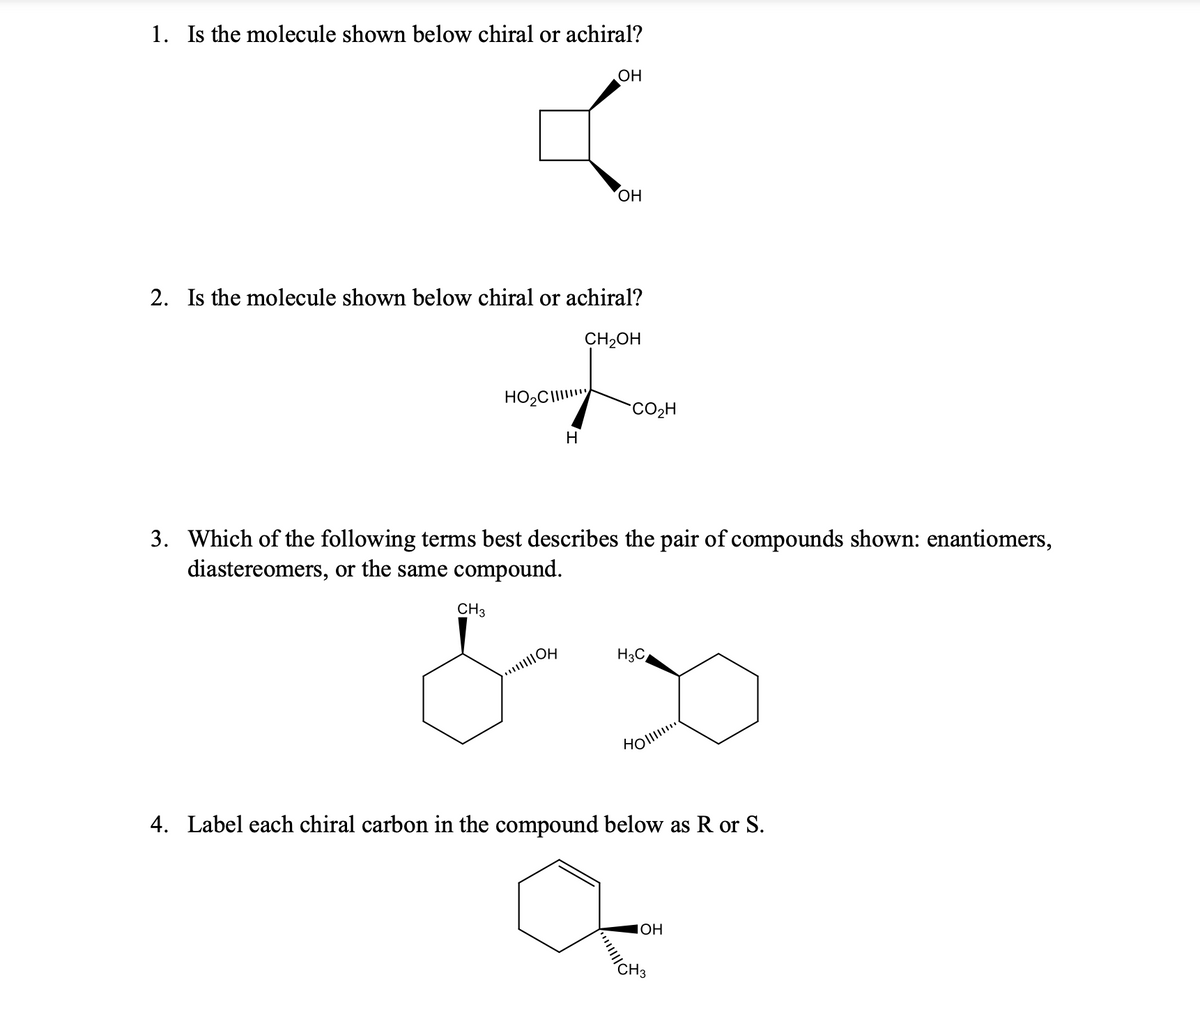 1. Is the molecule shown below chiral or achiral?
HO₂C
OH
2. Is the molecule shown below chiral or achiral?
CH₂OH
H
OH
CO₂H
3. Which of the following terms best describes the pair of compounds shown: enantiomers,
diastereomers, or the same compound.
CH3
& D
....!!!!!
H3C
Holl
4. Label each chiral carbon in the compound below as R or S.
JOH
// CH3